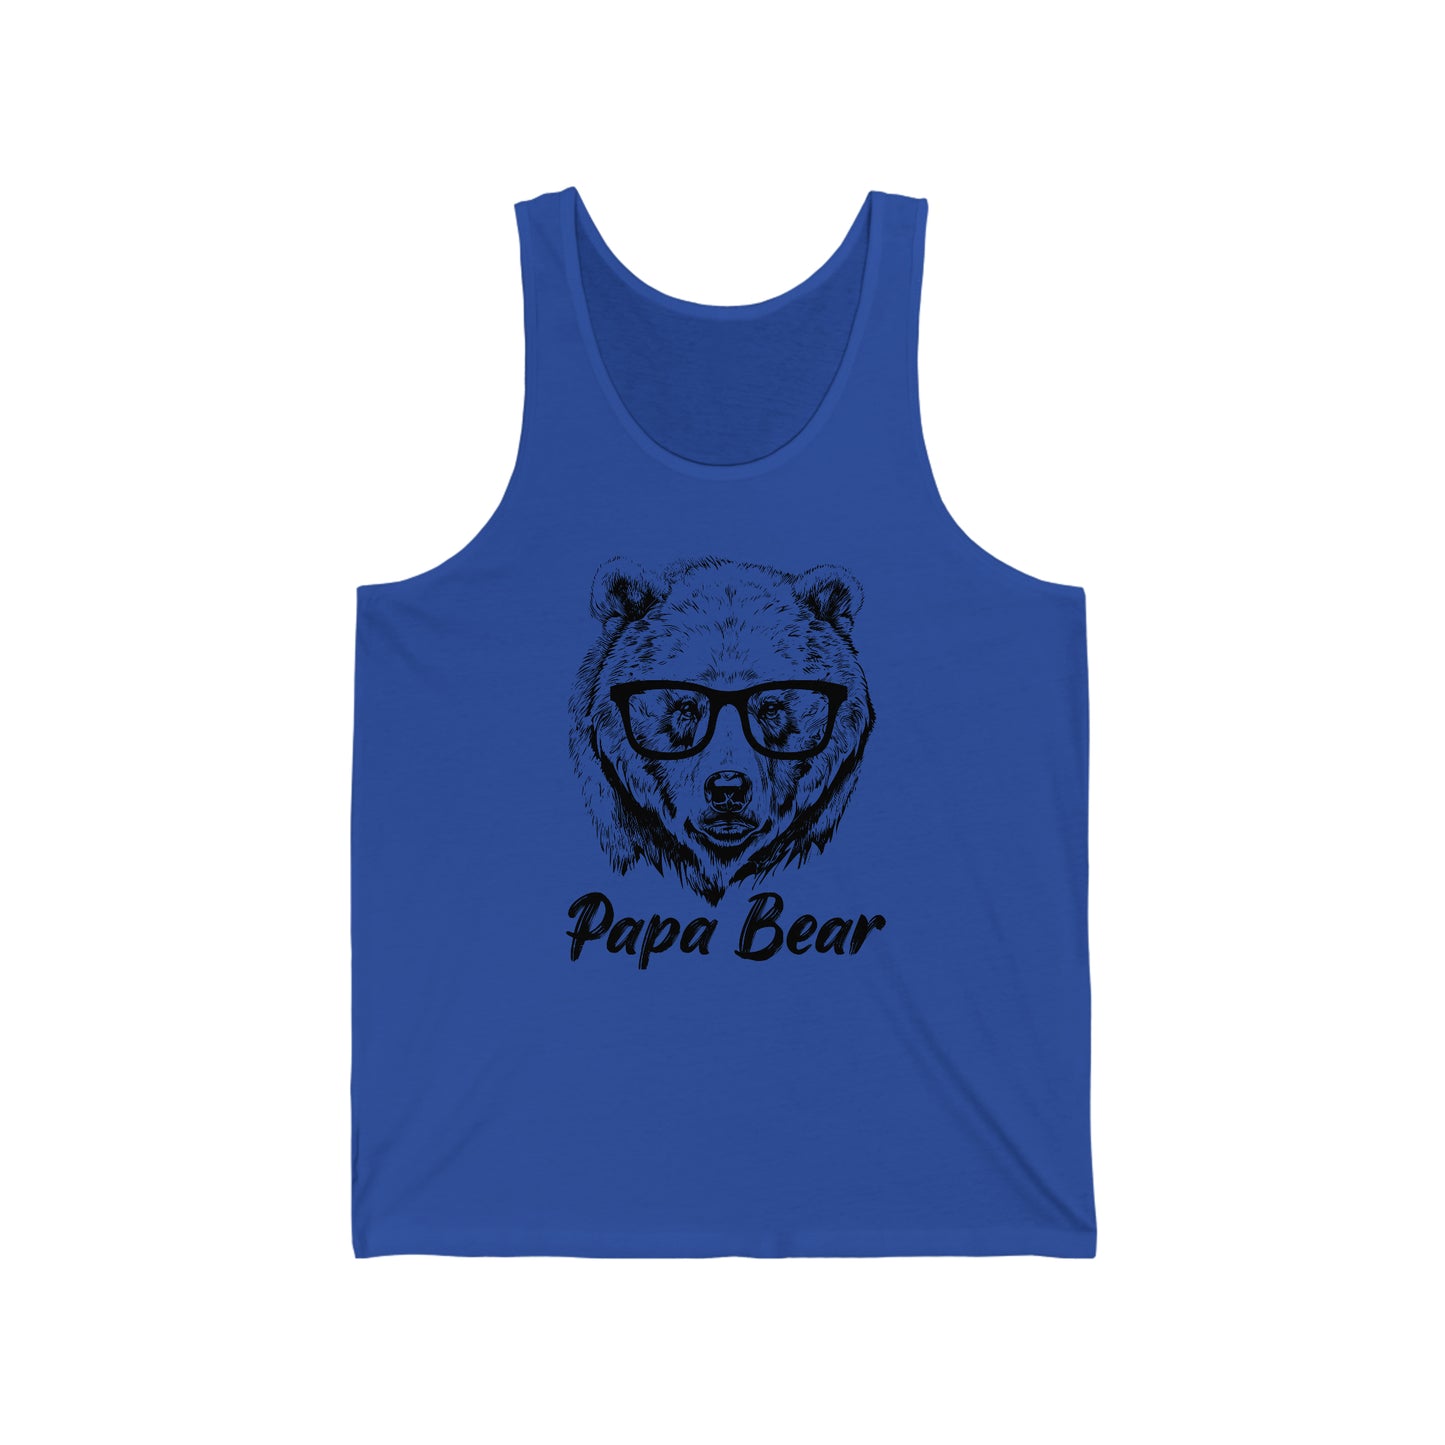 Papa Bear Tank Top For Protective Parent Tank For Dad Shirt For Father's Day Gift For Dad Shirt For Grandpa Shirt For Men